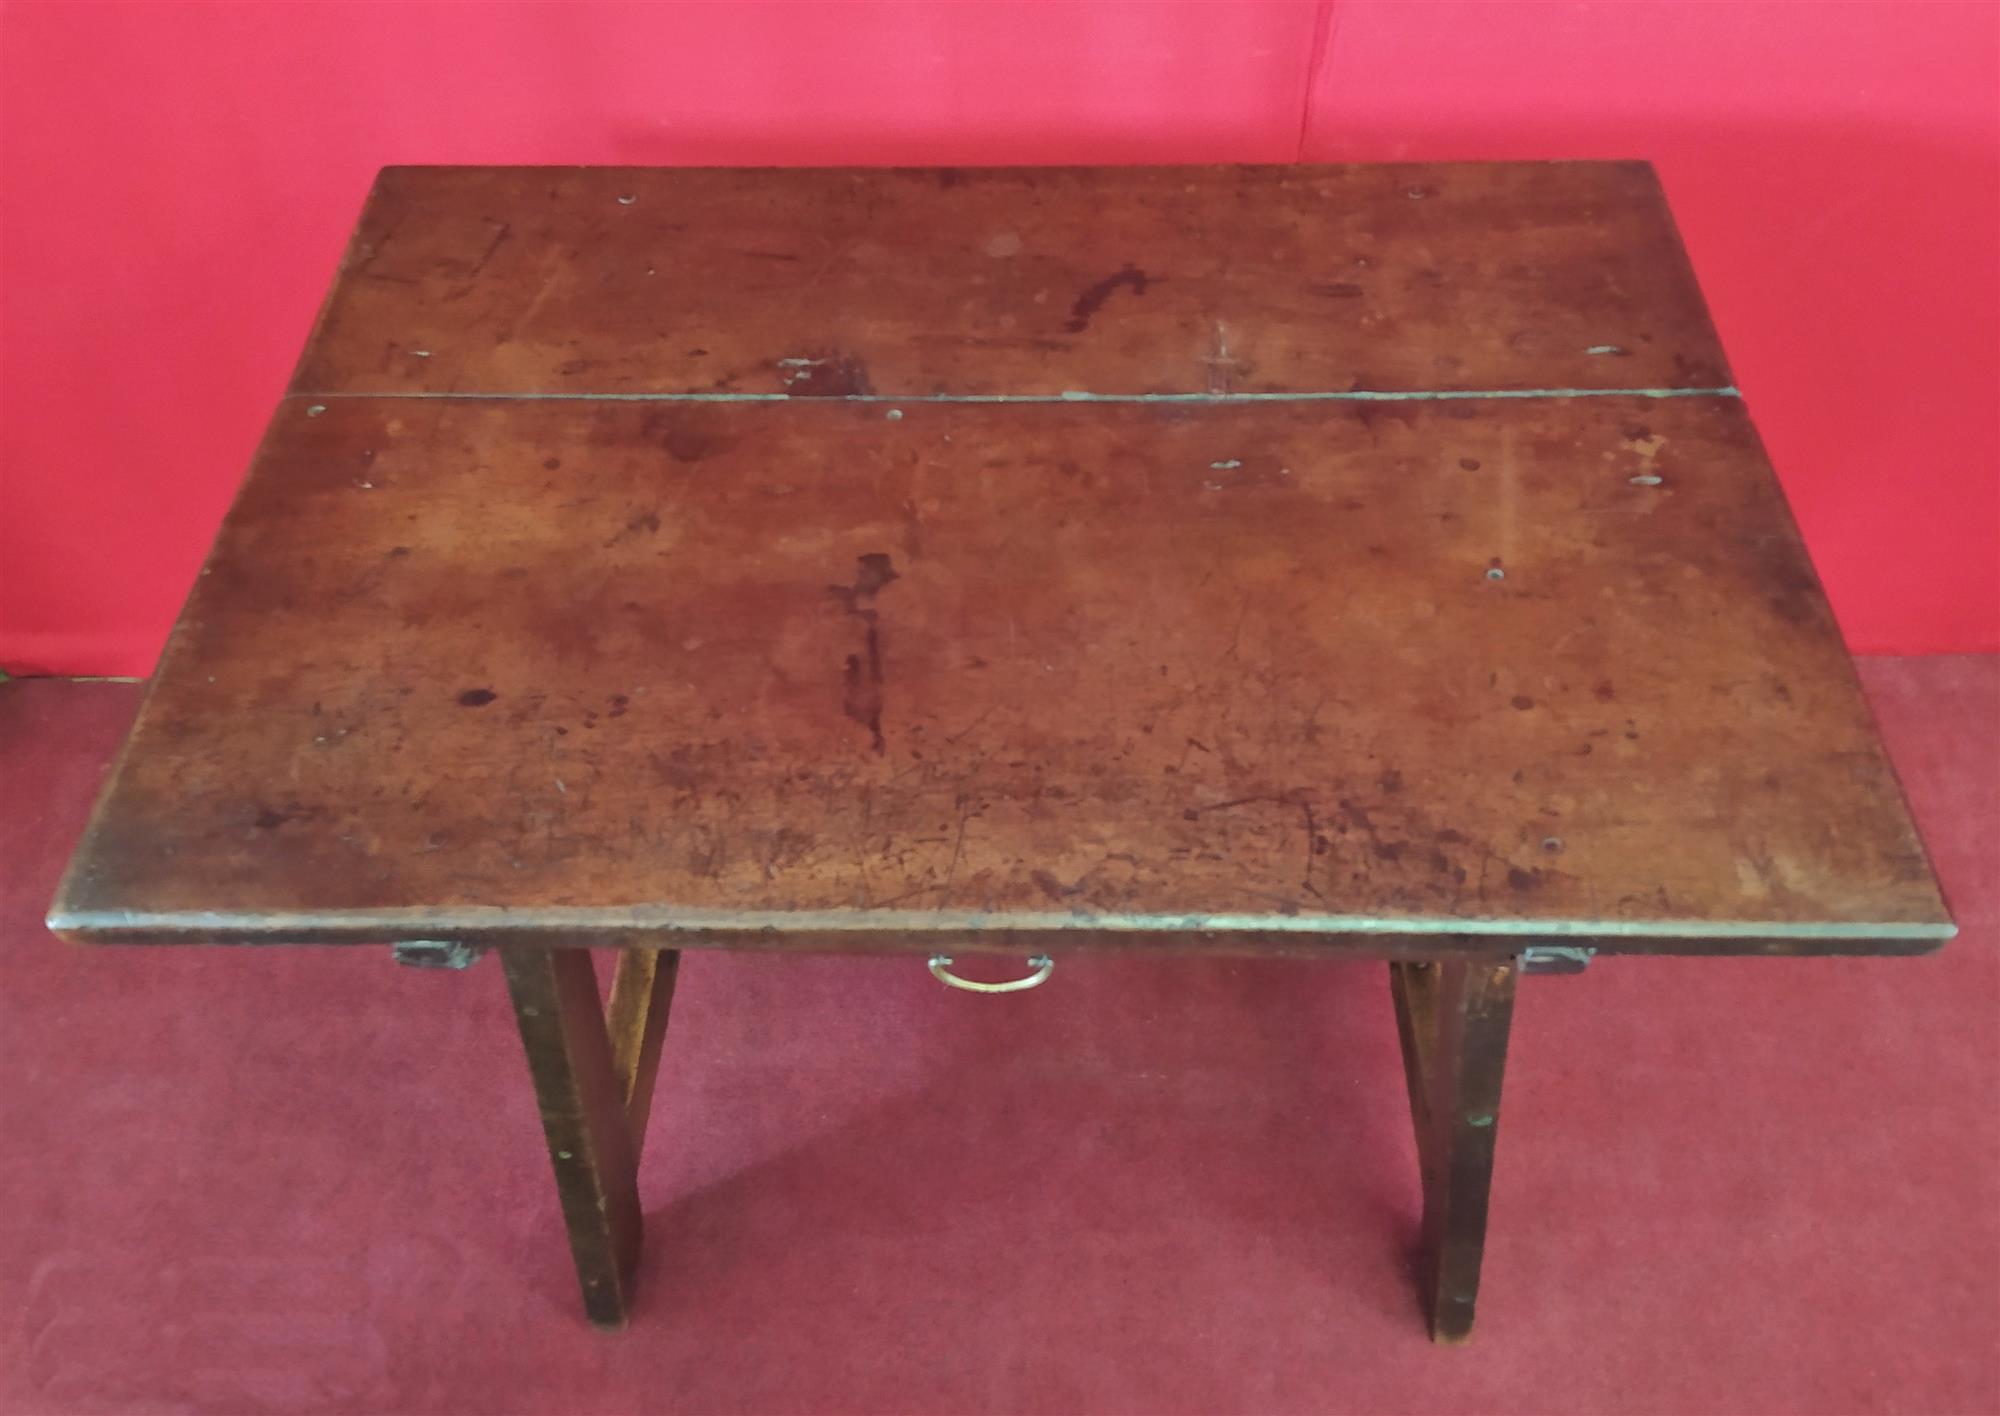 Small writing table from the end of the 17th century